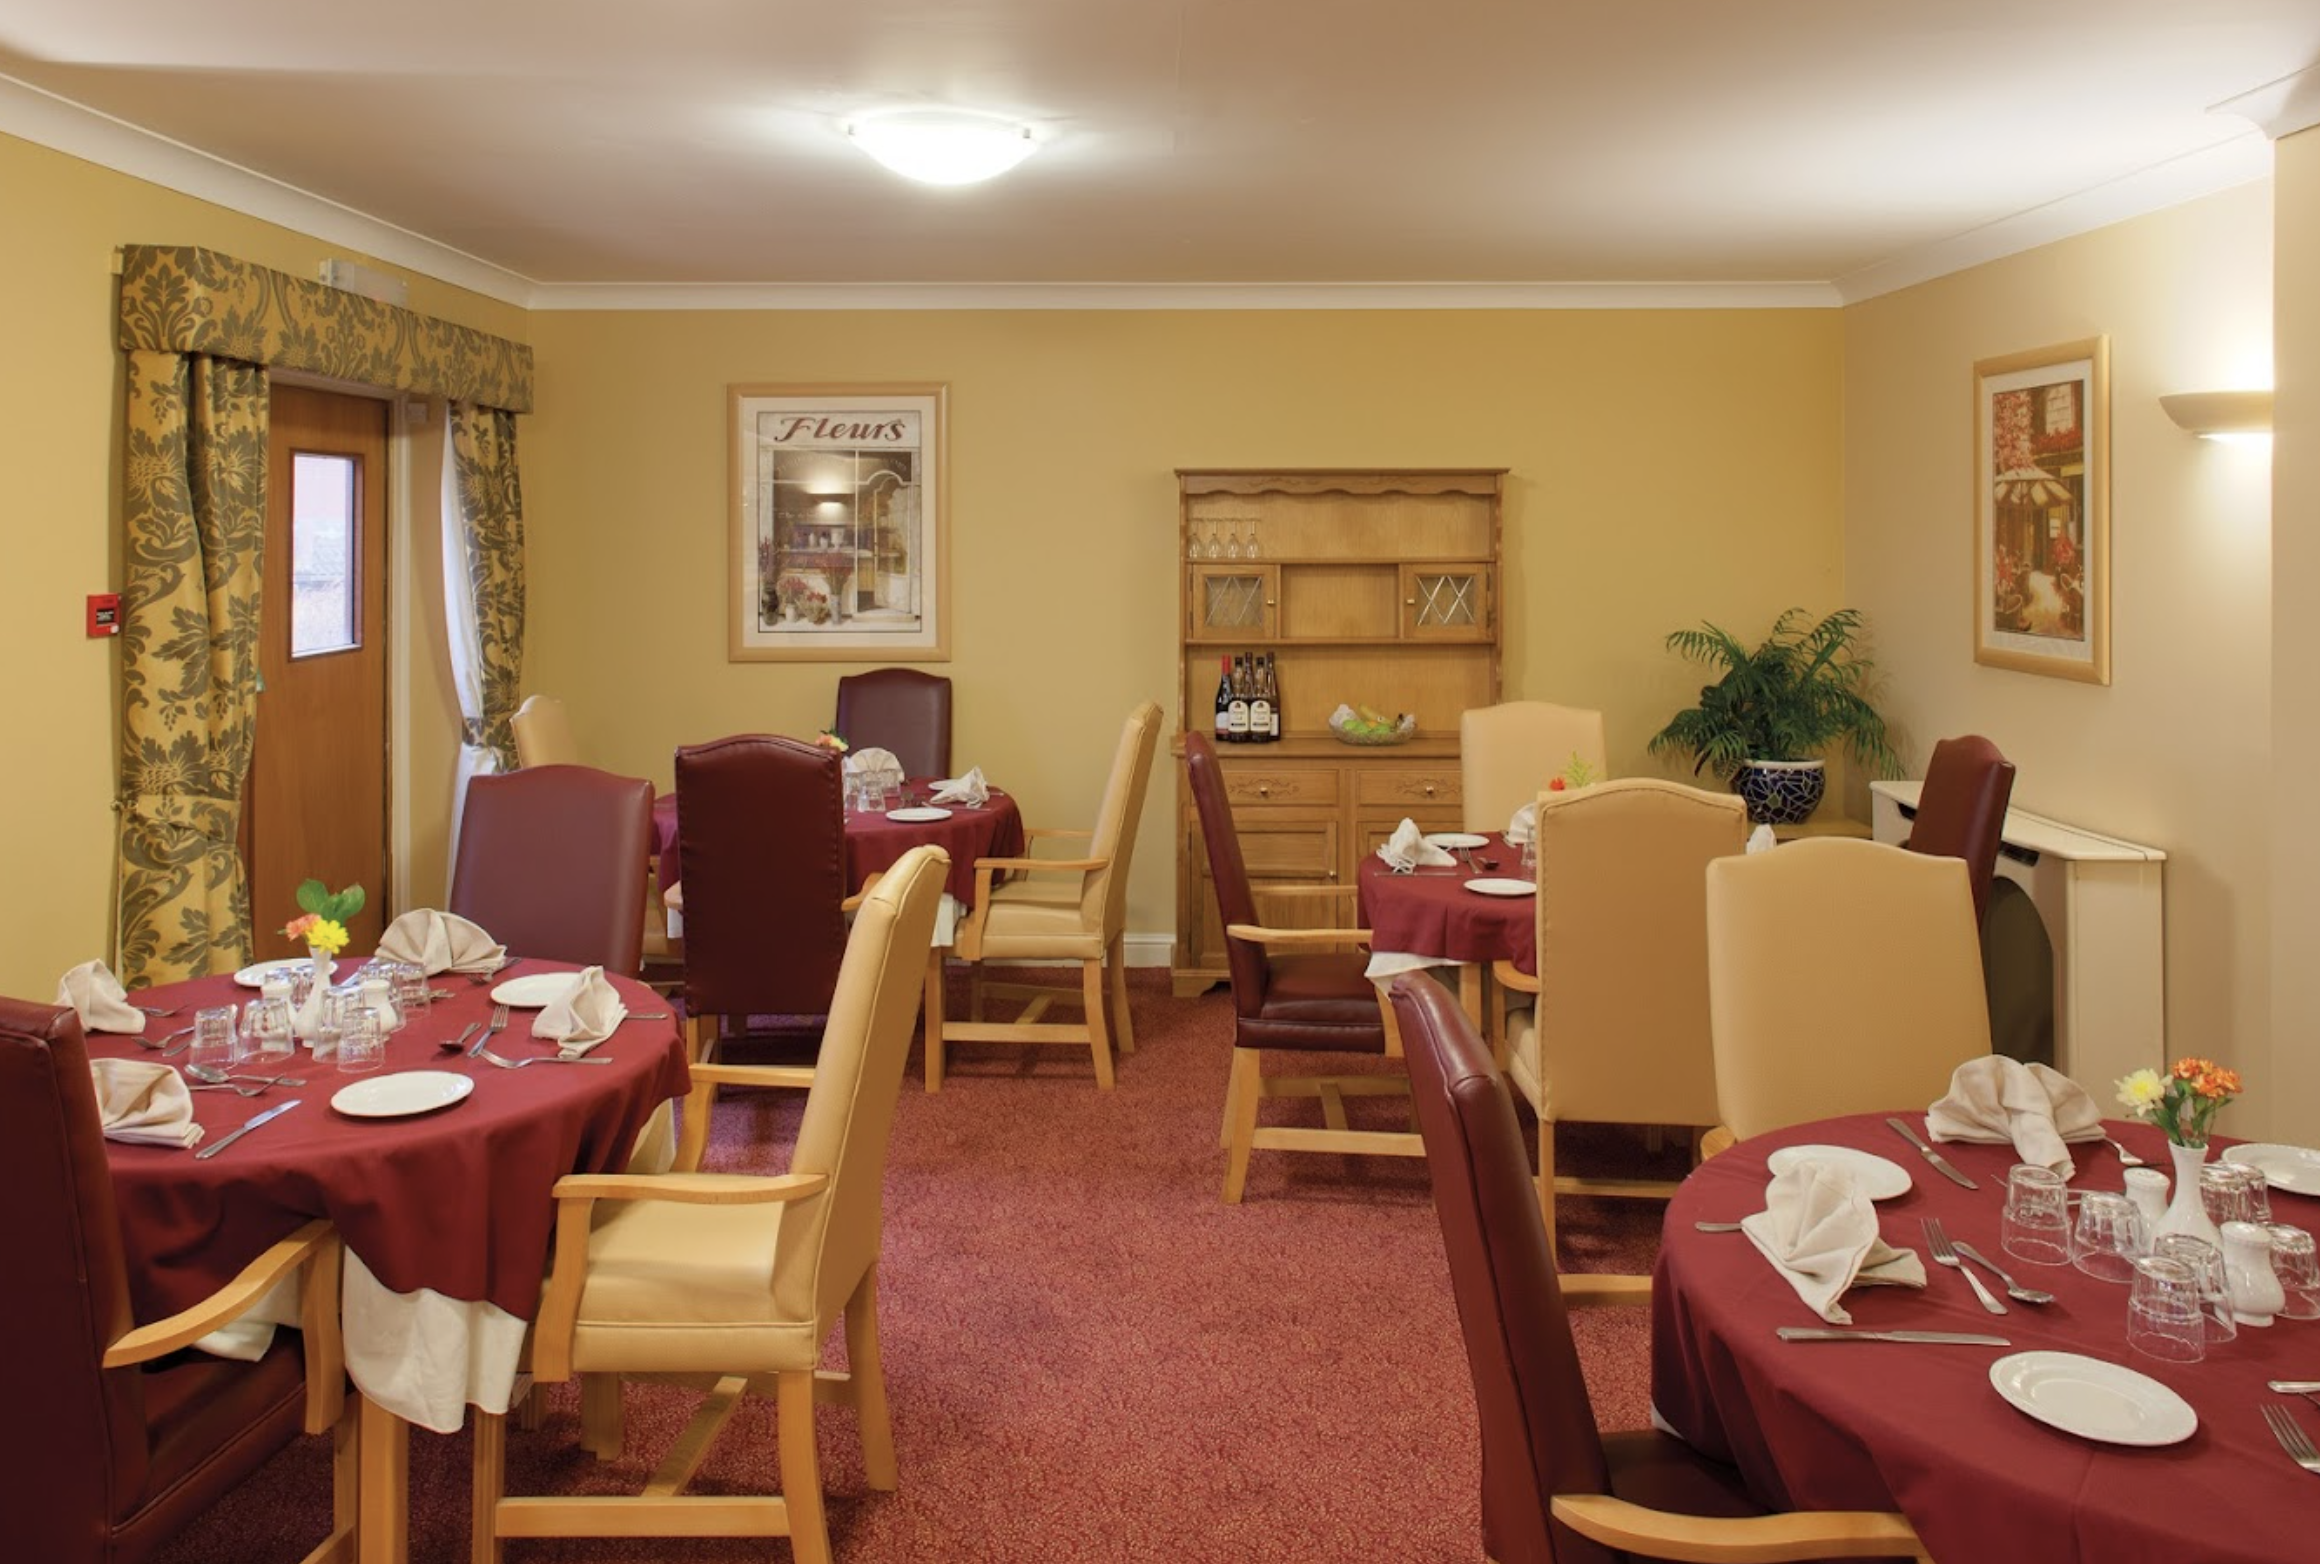 Dining room of The Priory care home in Solihull, West Midlands